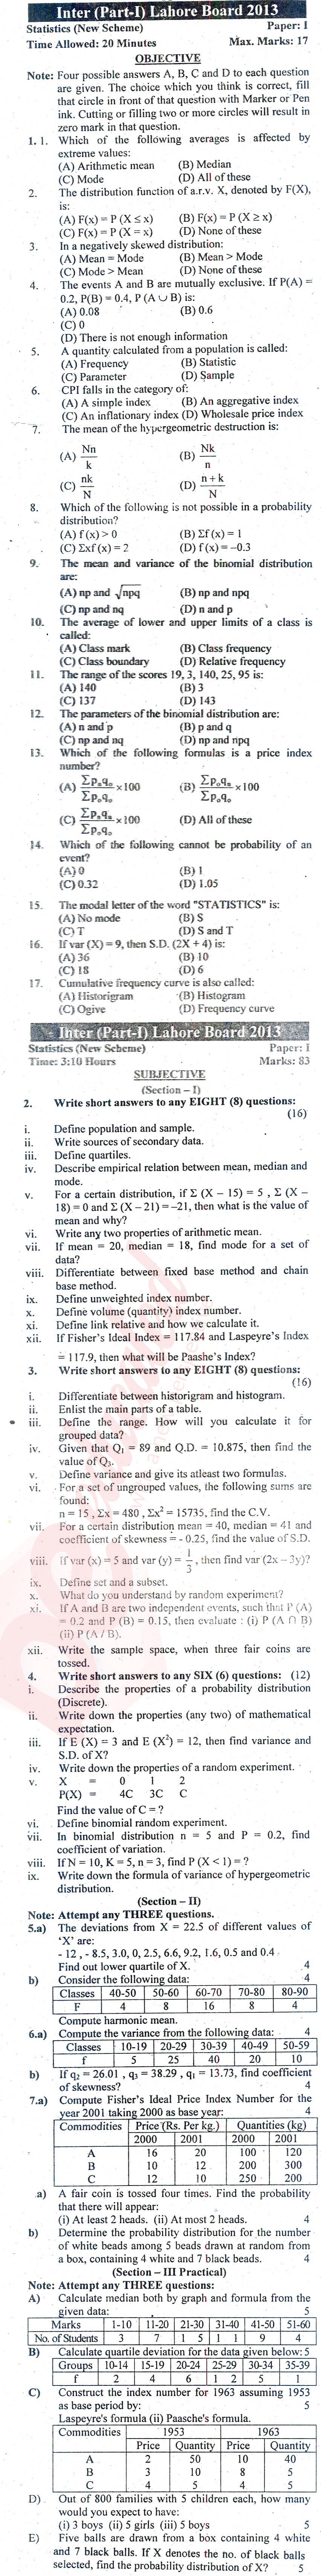 Statistics 11th class Past Paper Group 1 BISE Lahore 2013